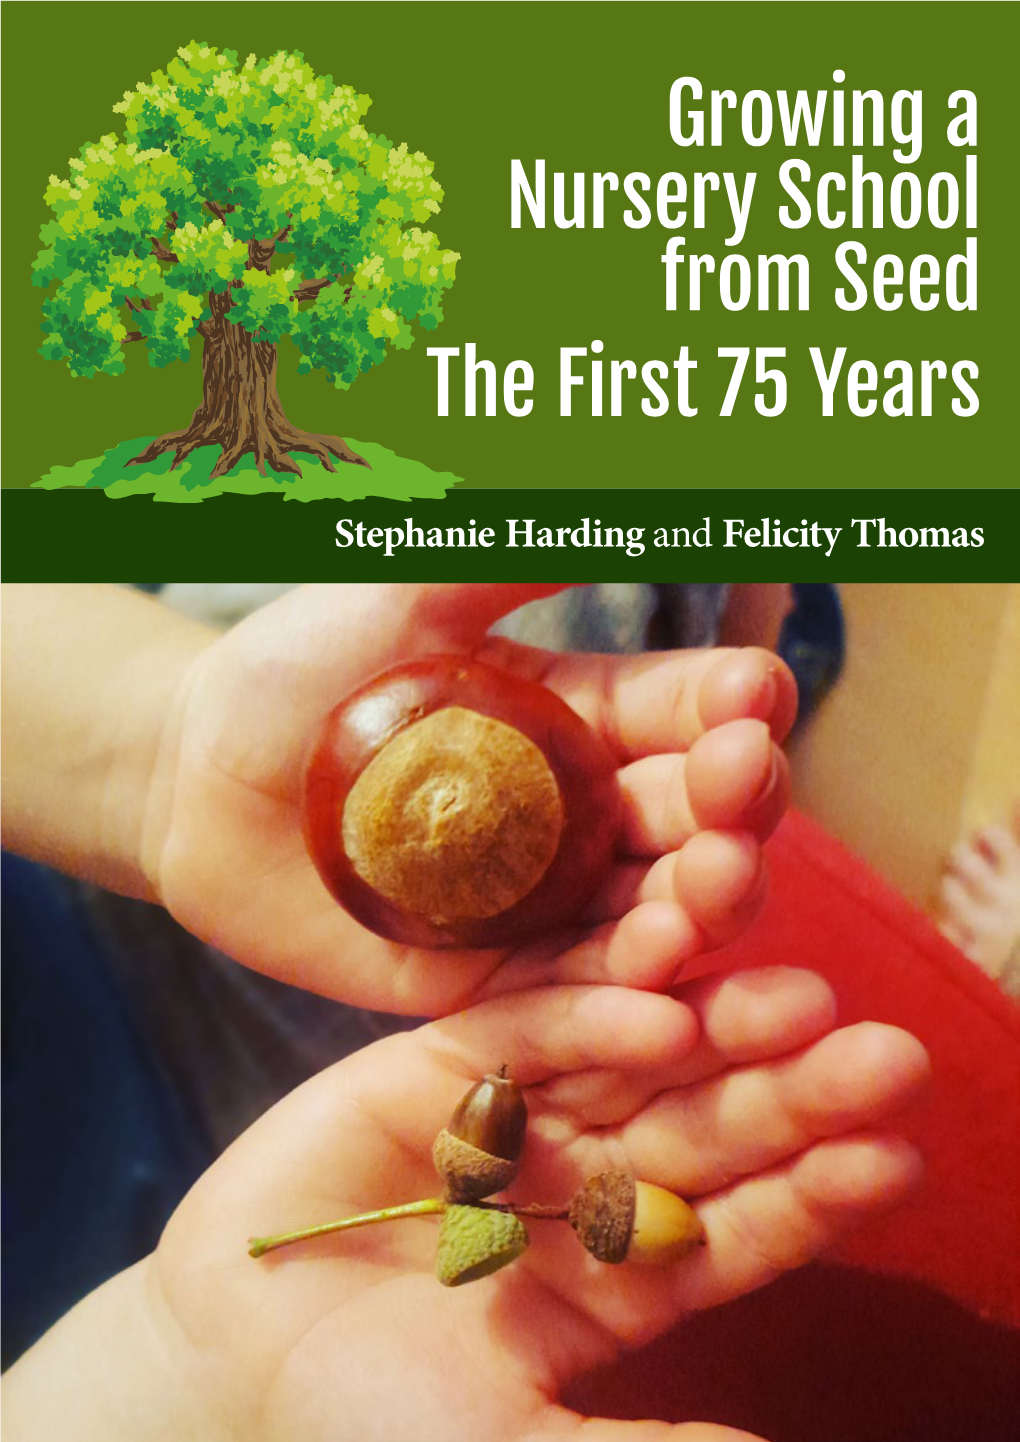 Growing a Nursery School from Seed the First 75 Years